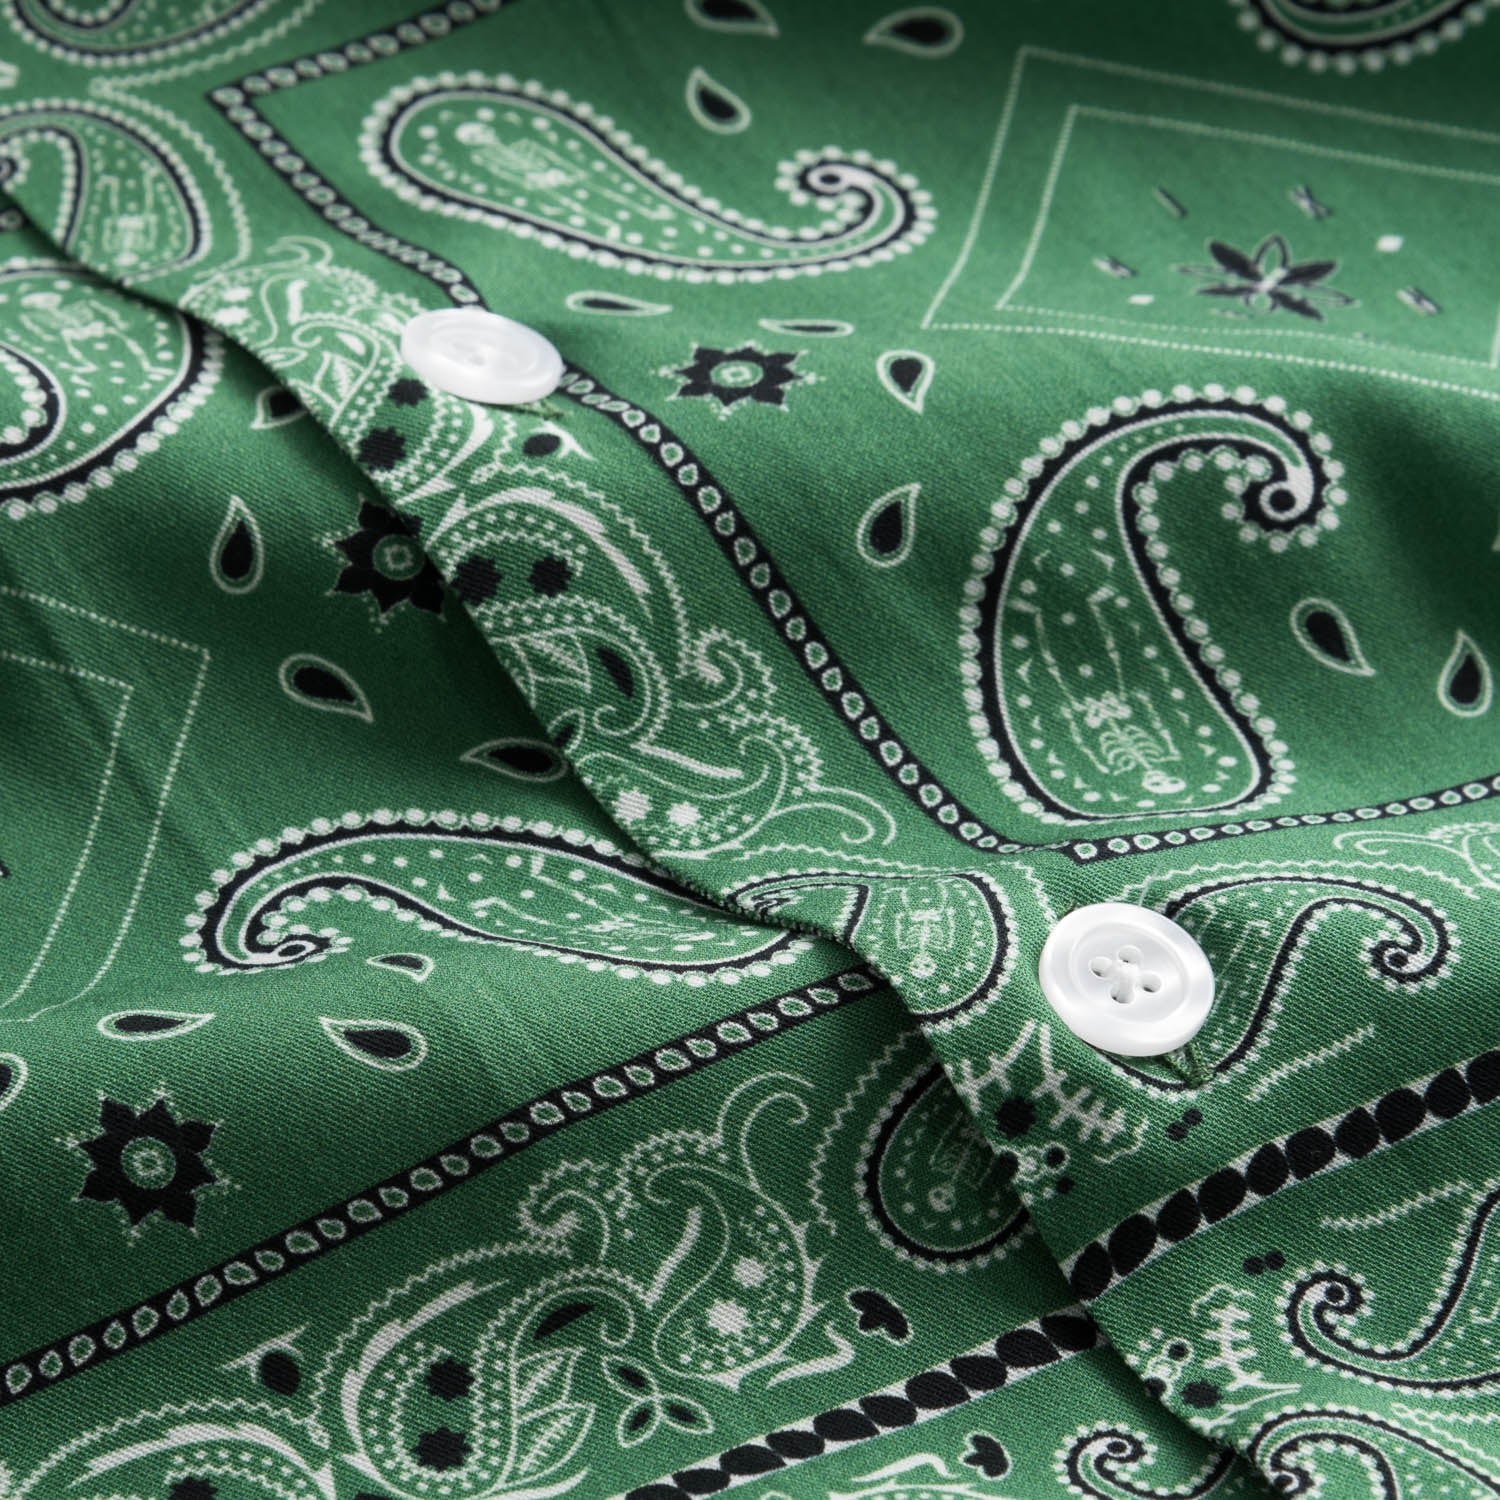 White pearl buttons on green vacation shirt